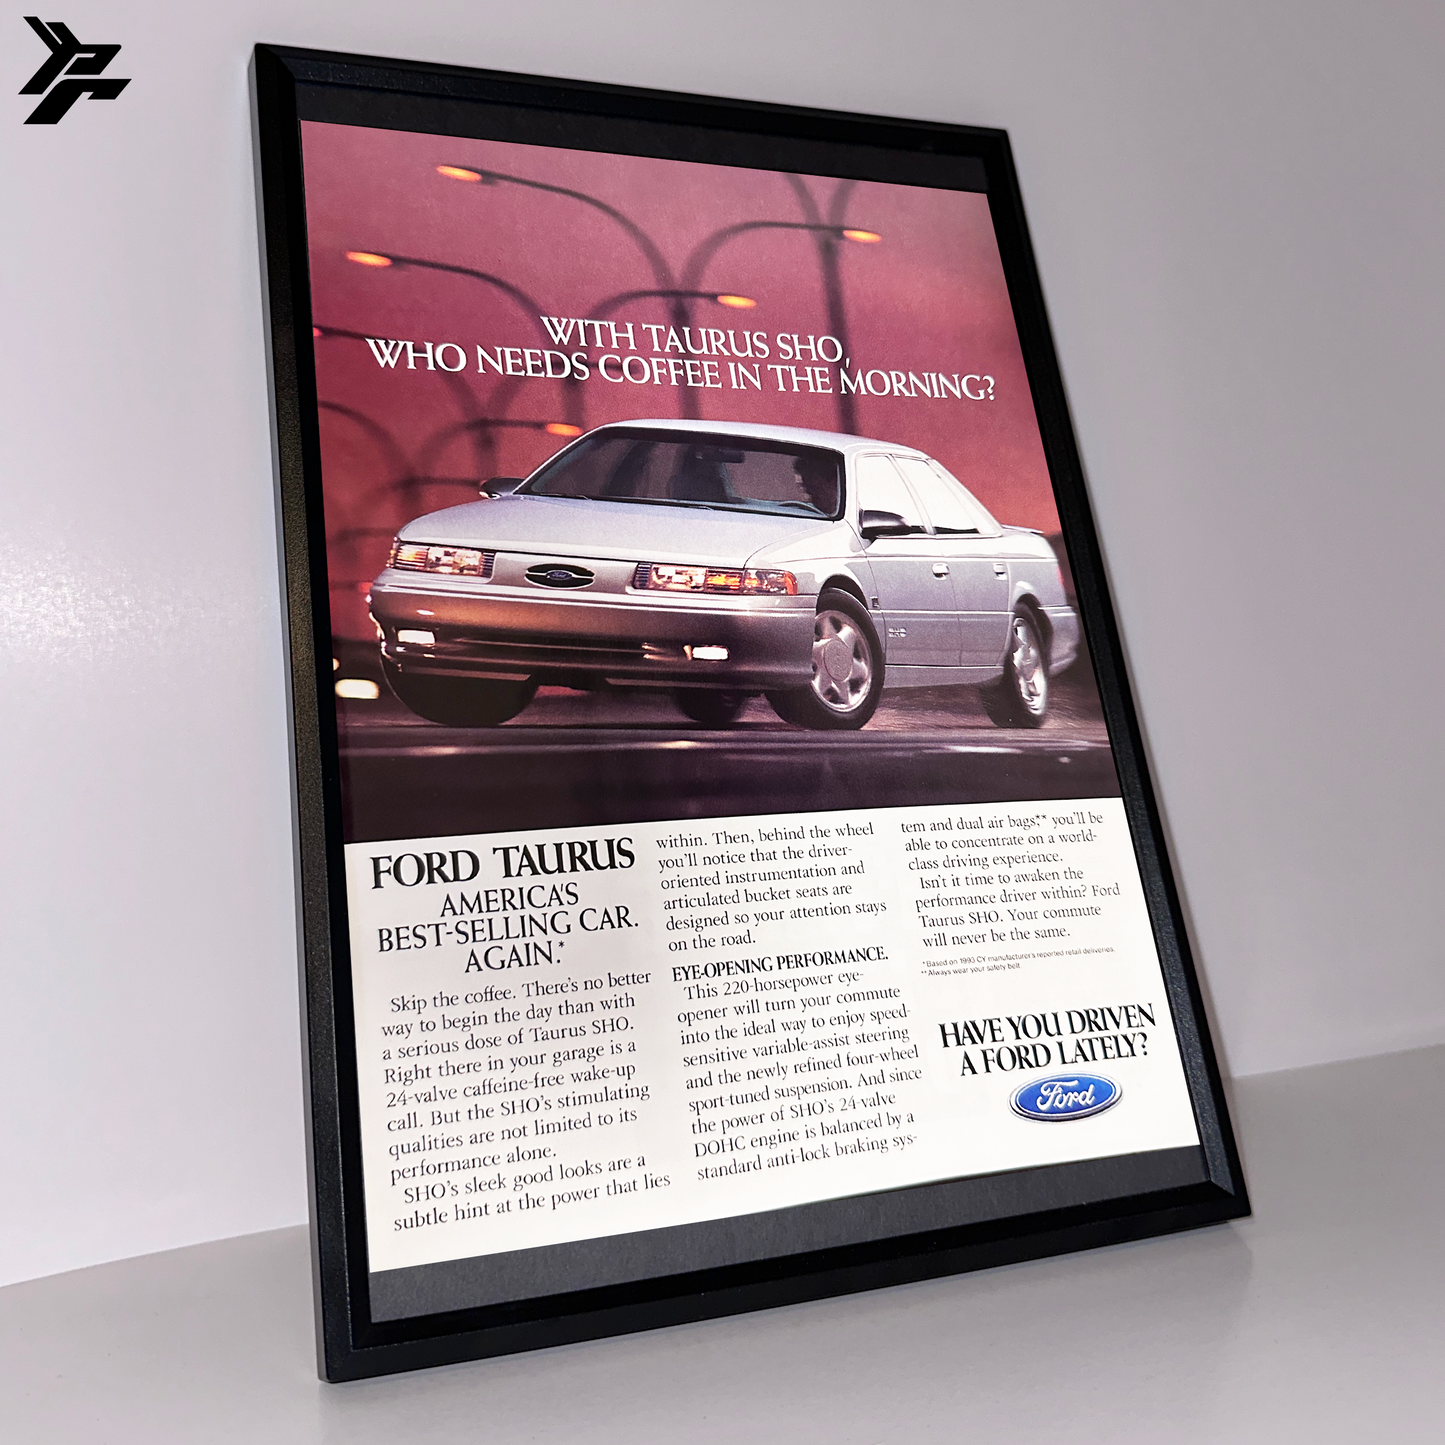 Ford Taurus best selling cars framed ad